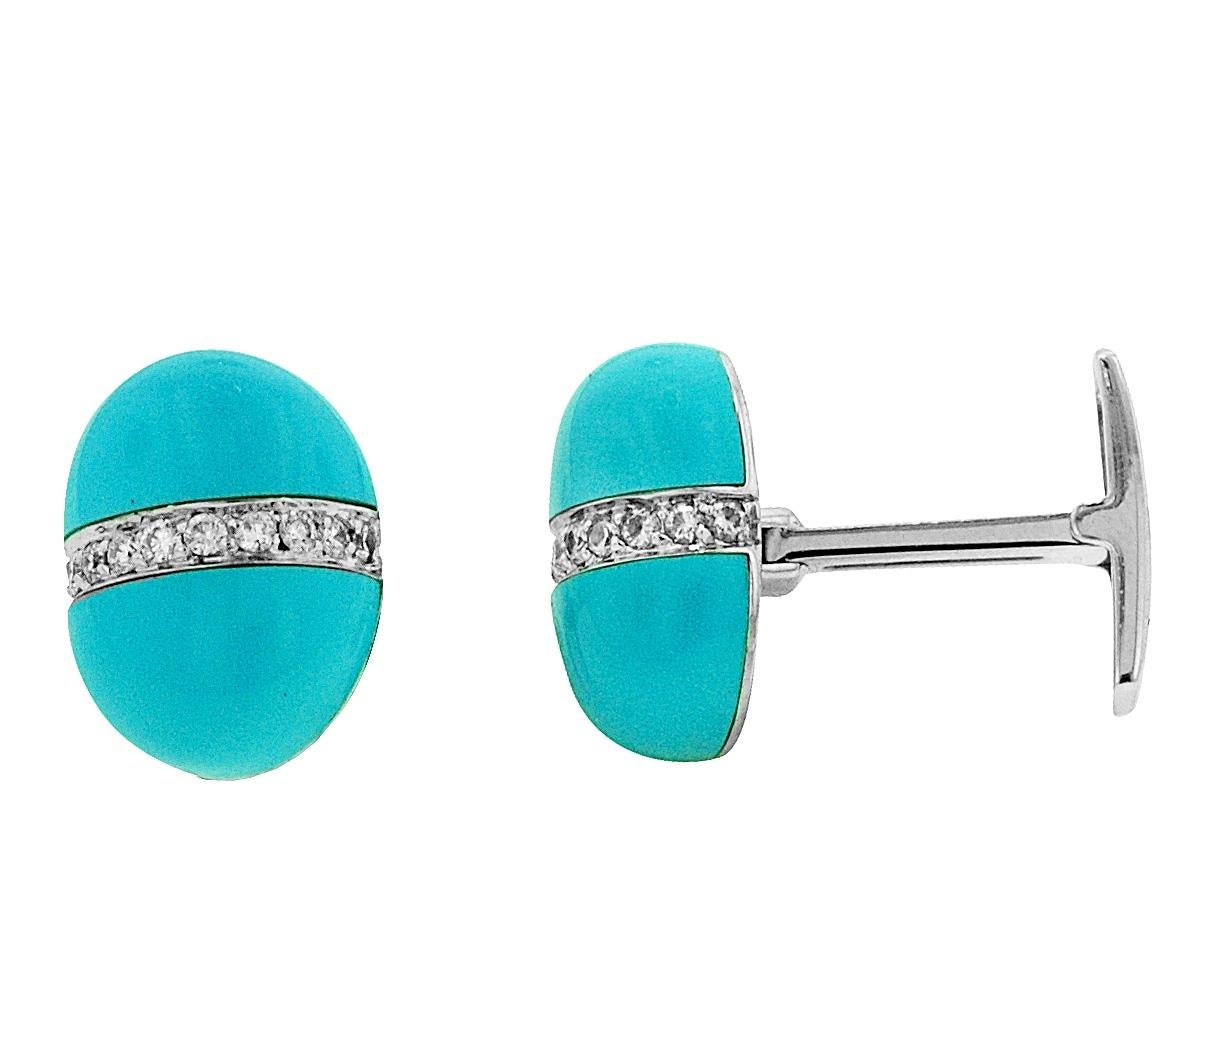 Andreoli 0.45 Carat Diamond Turquoise 18 Karat White Gold Cufflinks In New Condition For Sale In New York, NY